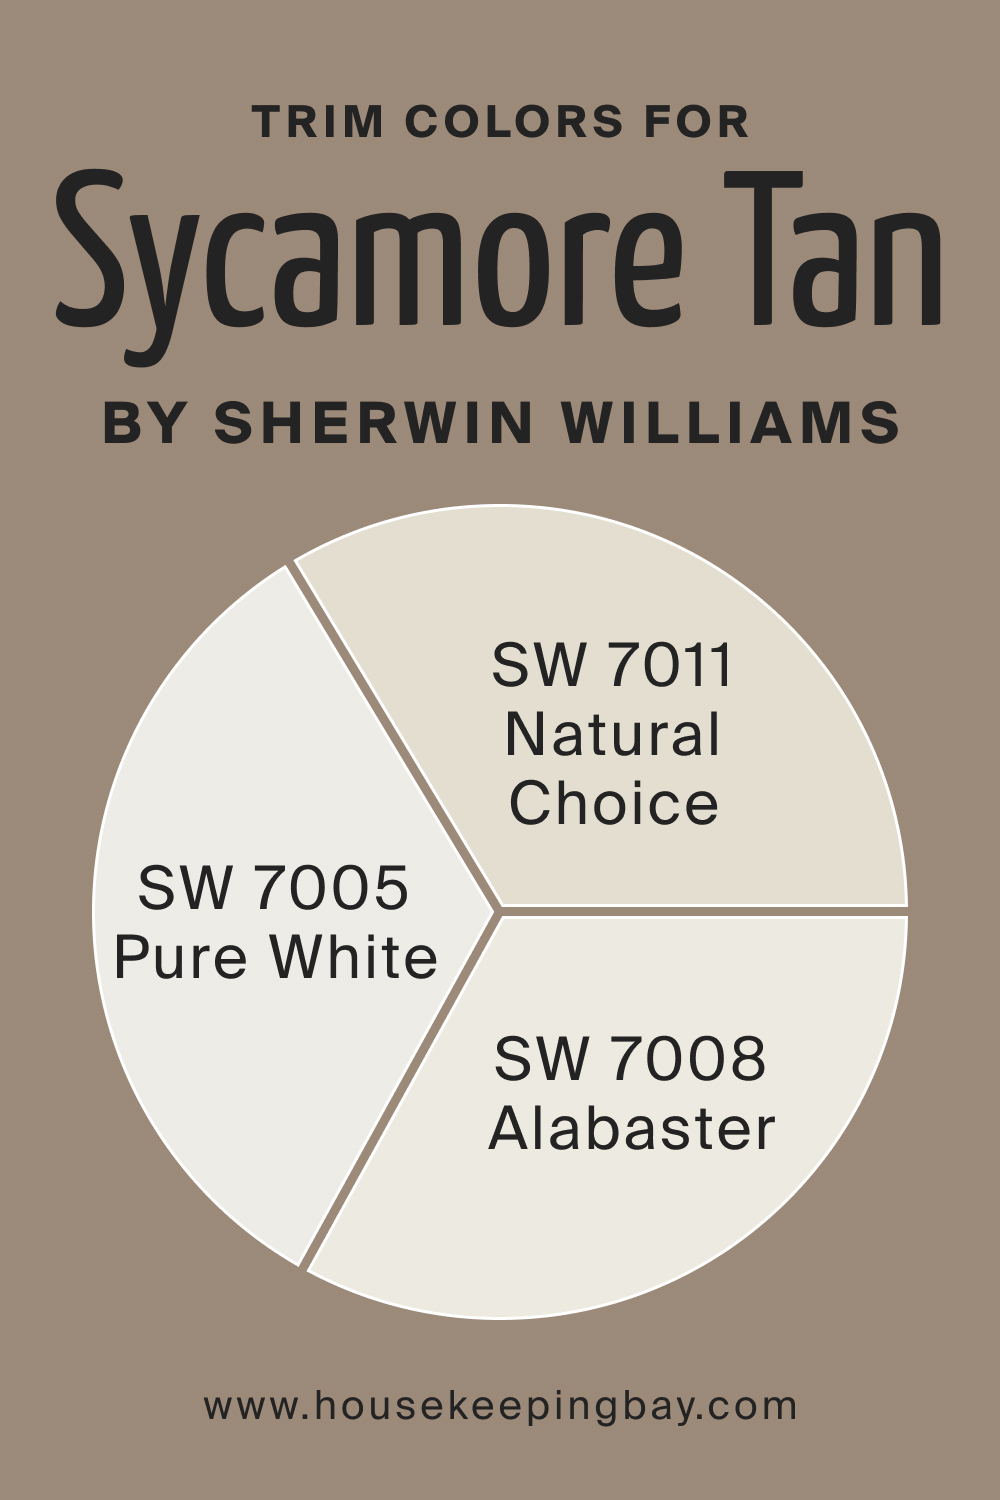 Coordinating Colors for SW 2855 Sycamore Tan by Sherwin Williams